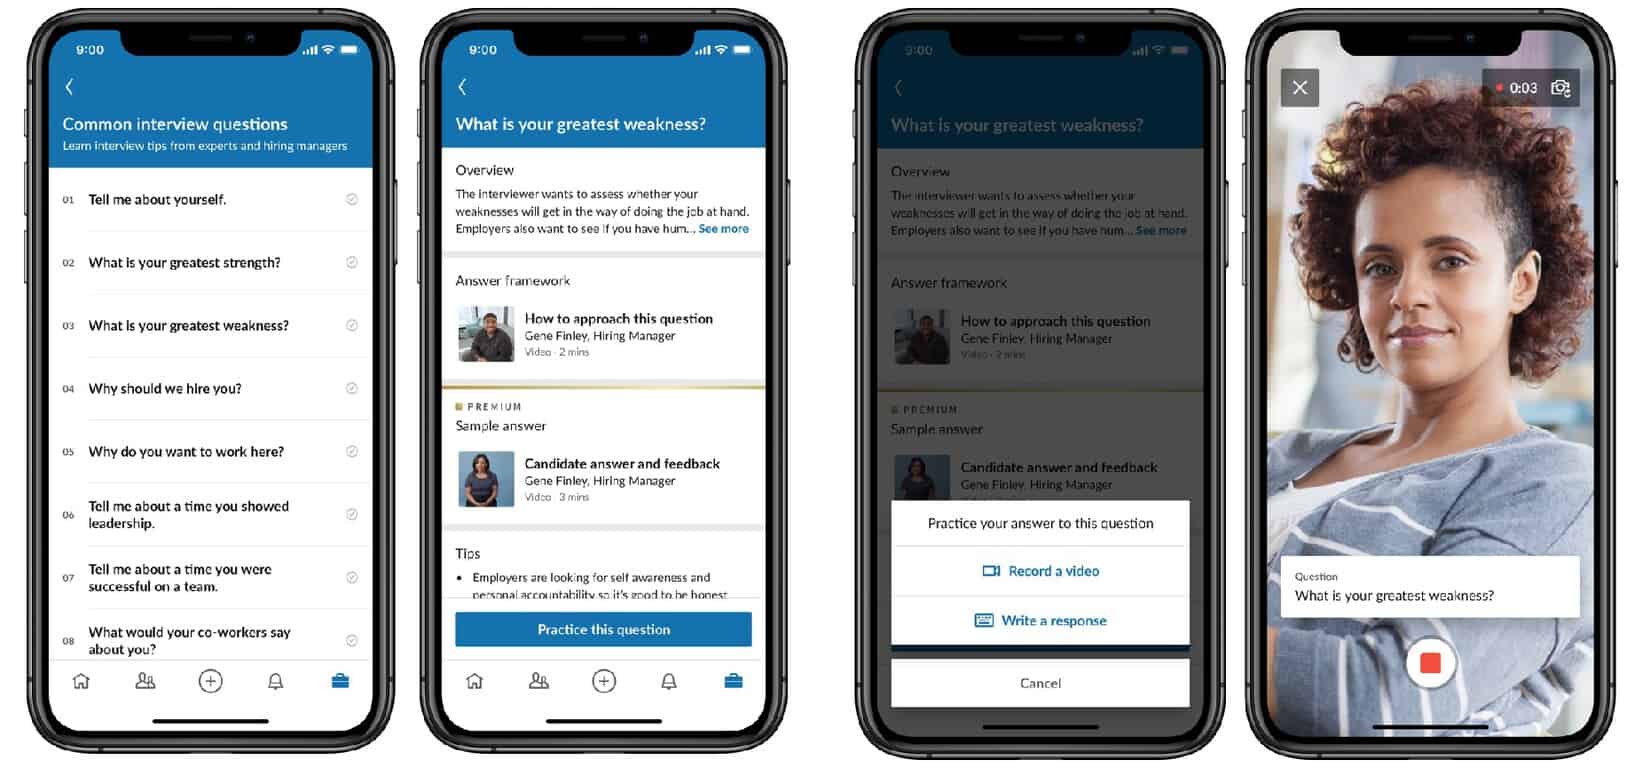 LinkedIn introduces new tools for people to prep for their interviews